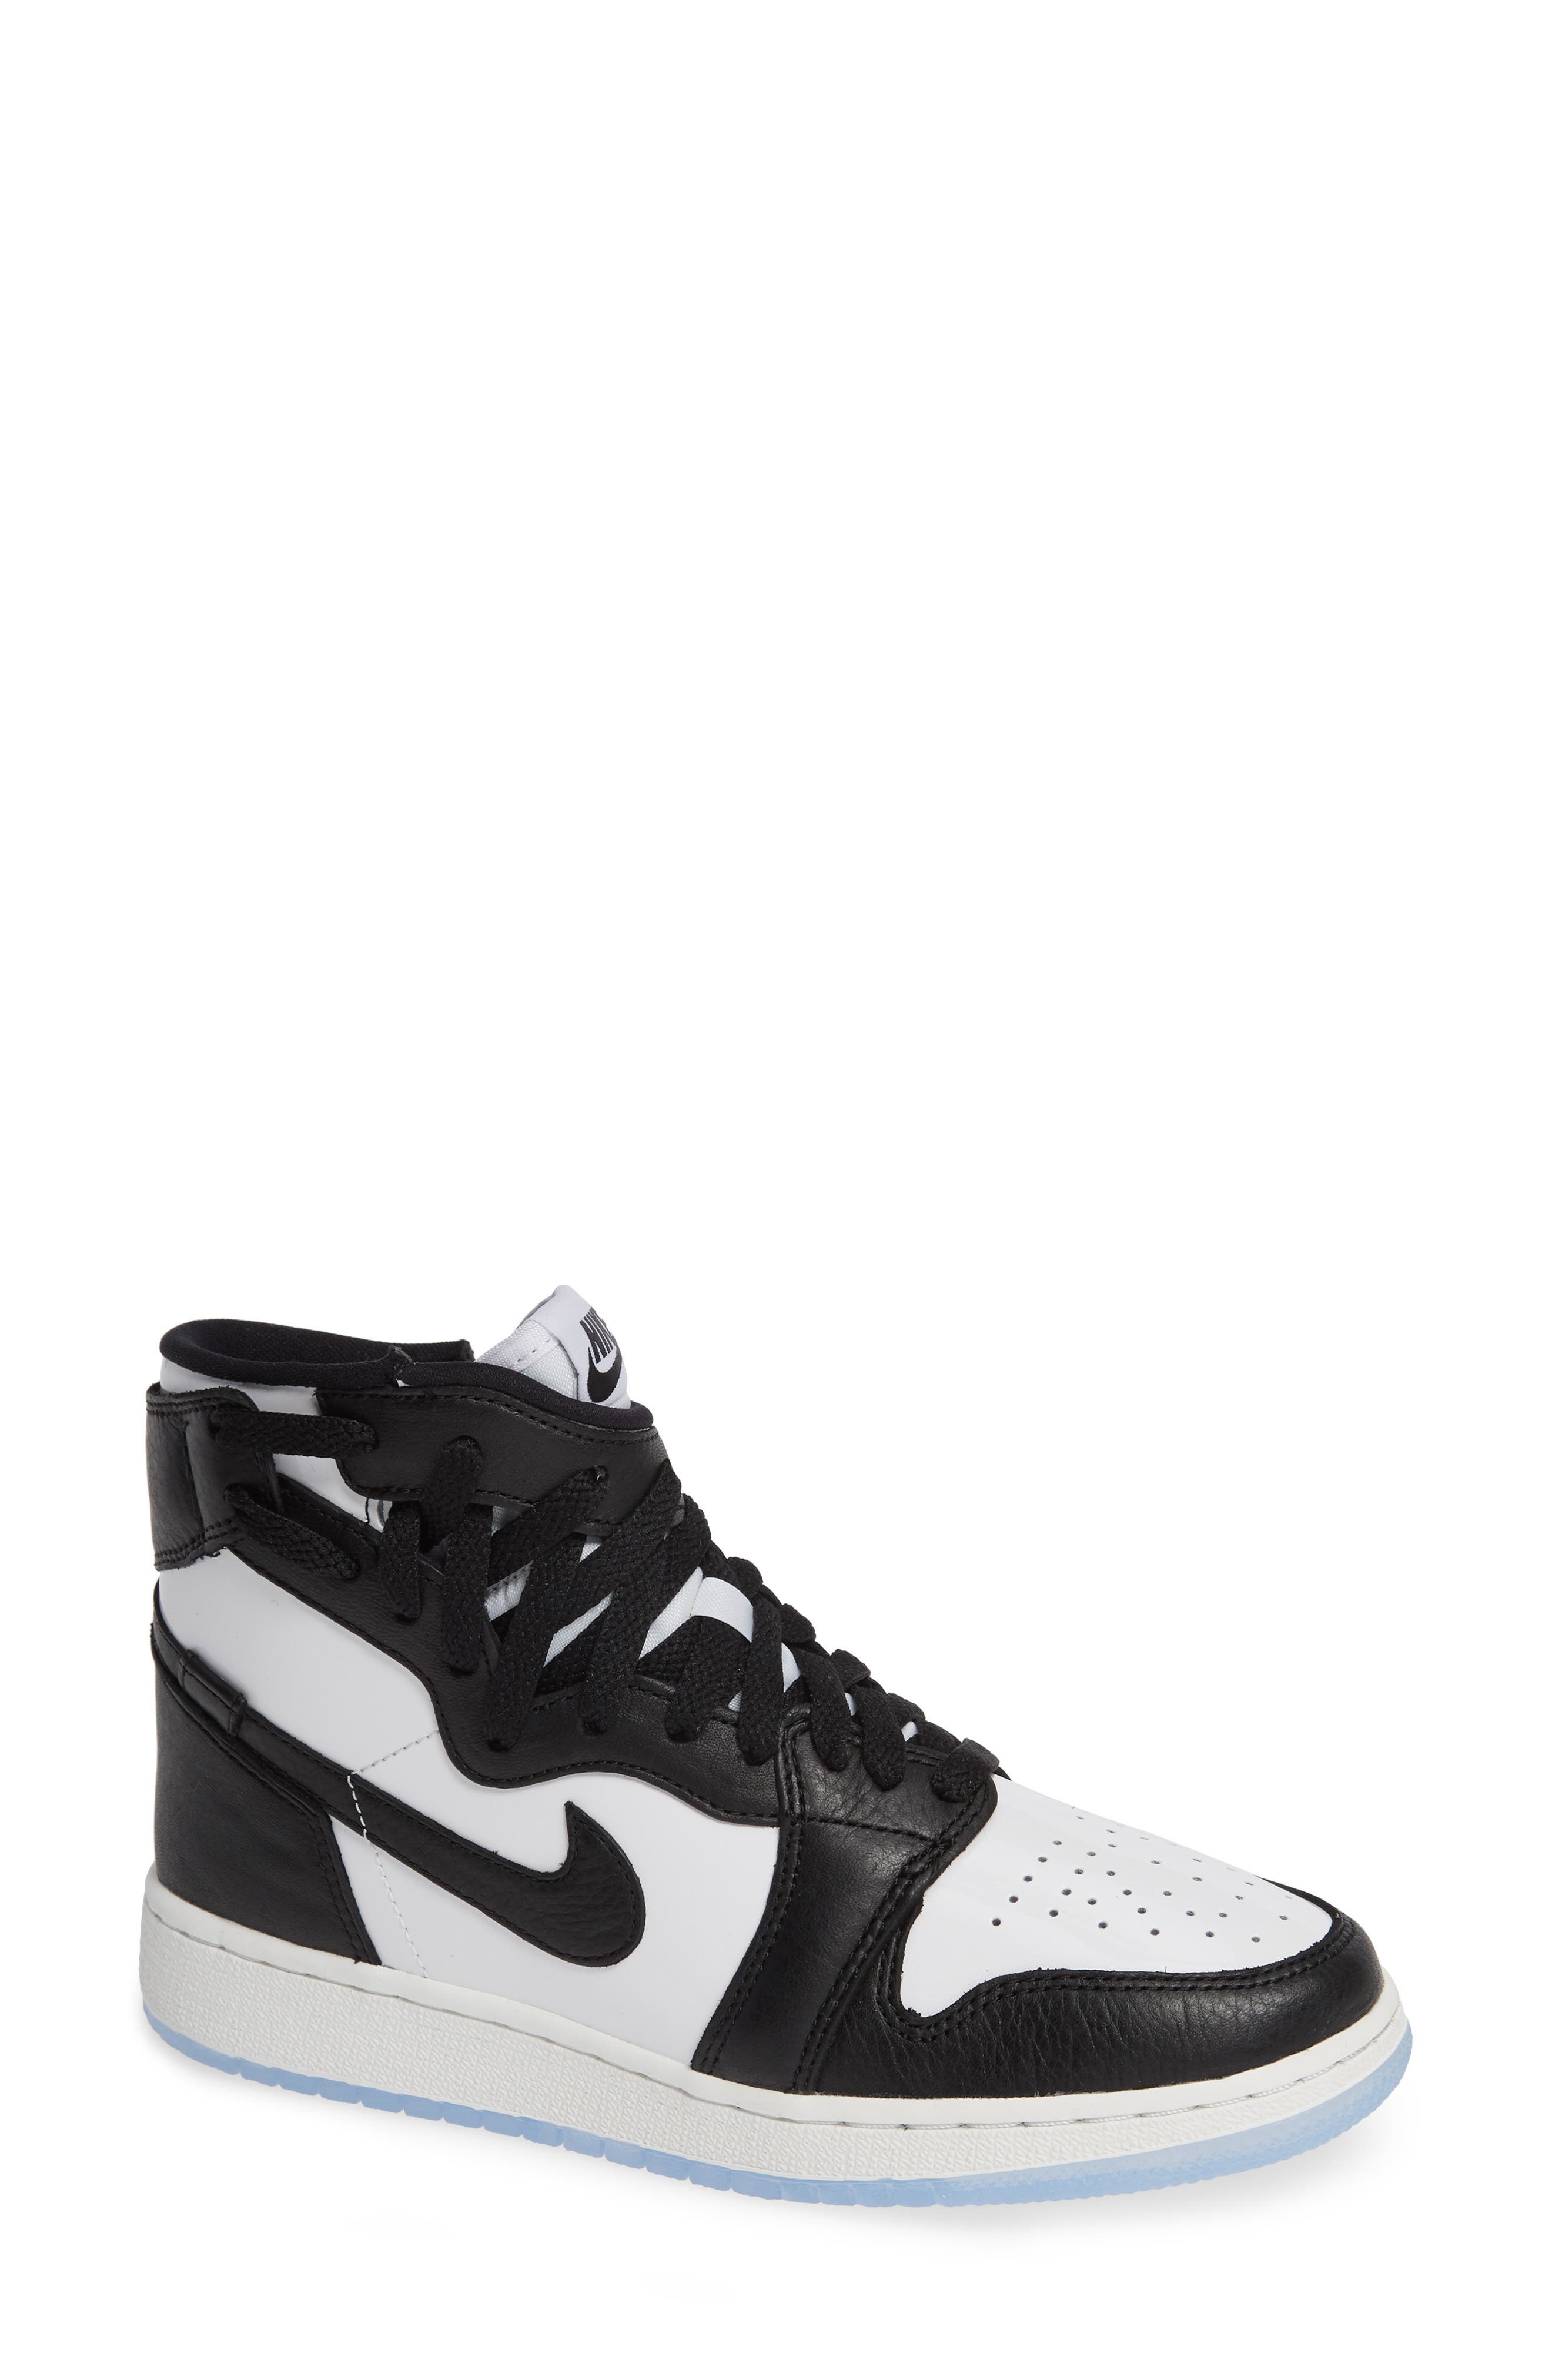 high top black and white nikes